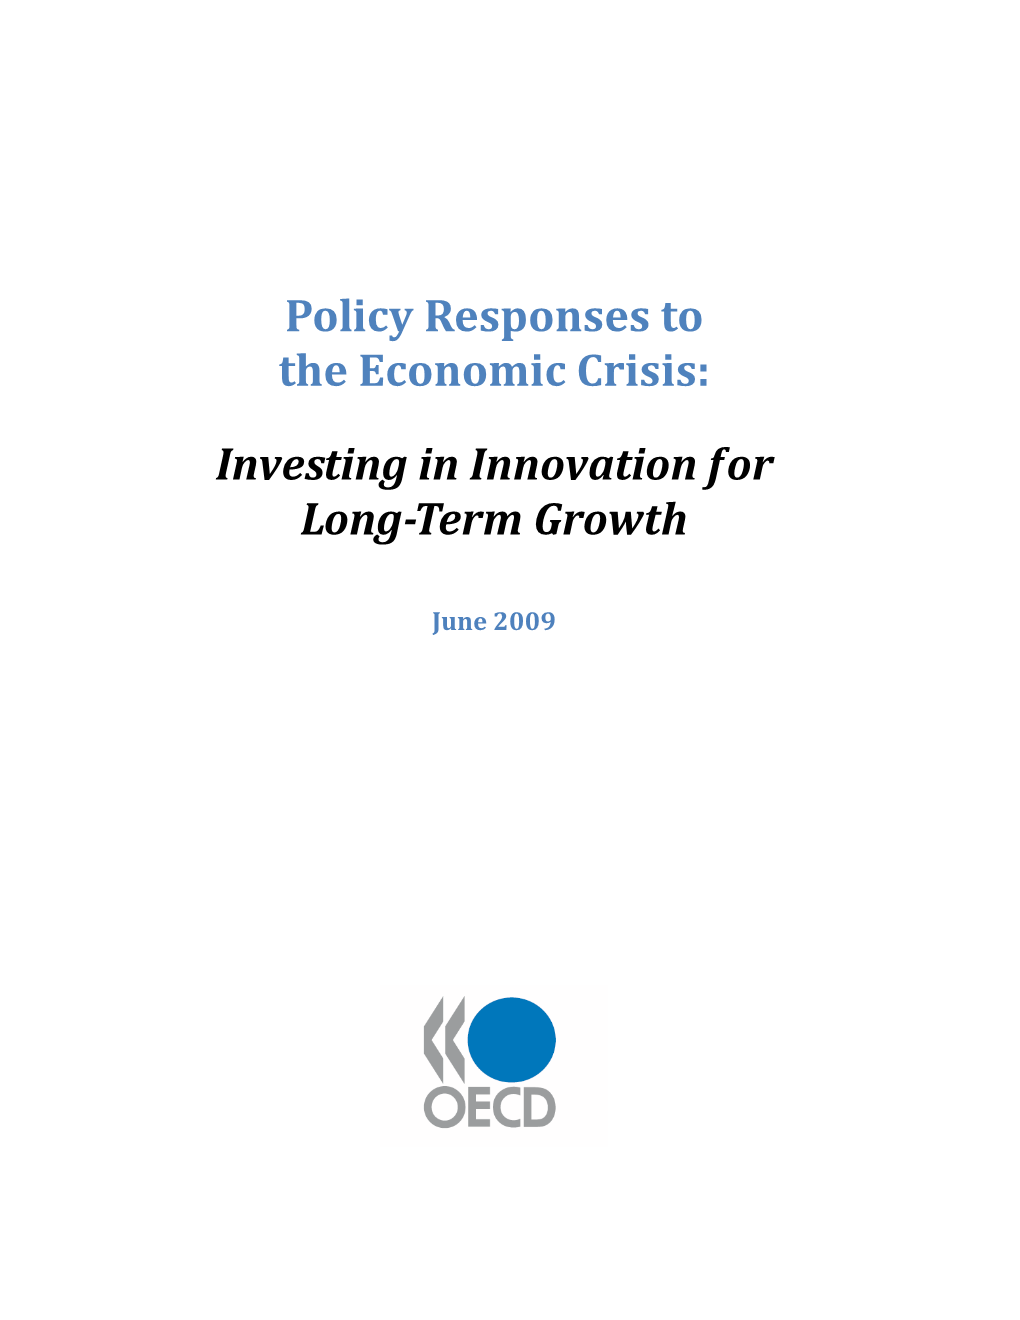 Policy Responses to the Economic Crisis: Investing in Innovation for Long-Term Growth – 3